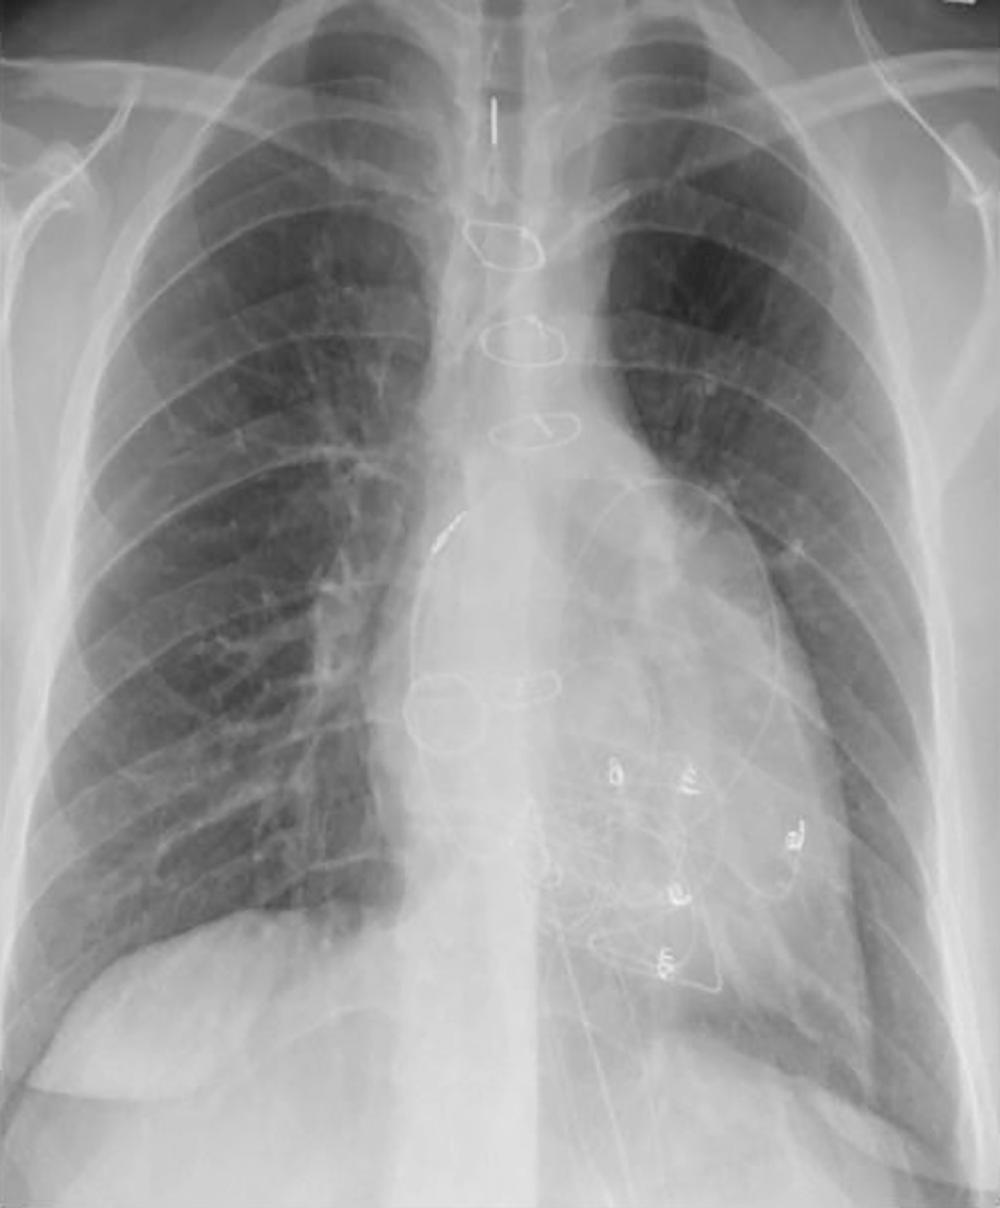 Fig. 73.14, Chest radiography of the patient in Fig. 73.13 after placement of an epicardial pacemaker system with one atrial and five unipolar ventricular leads, one of which is disconnected. Two sets of unipolar leads were placed to resynchronize the functional single ventricle because of ventricular dysfunction. The atrial lead is an endocardial lead placed epicardially.